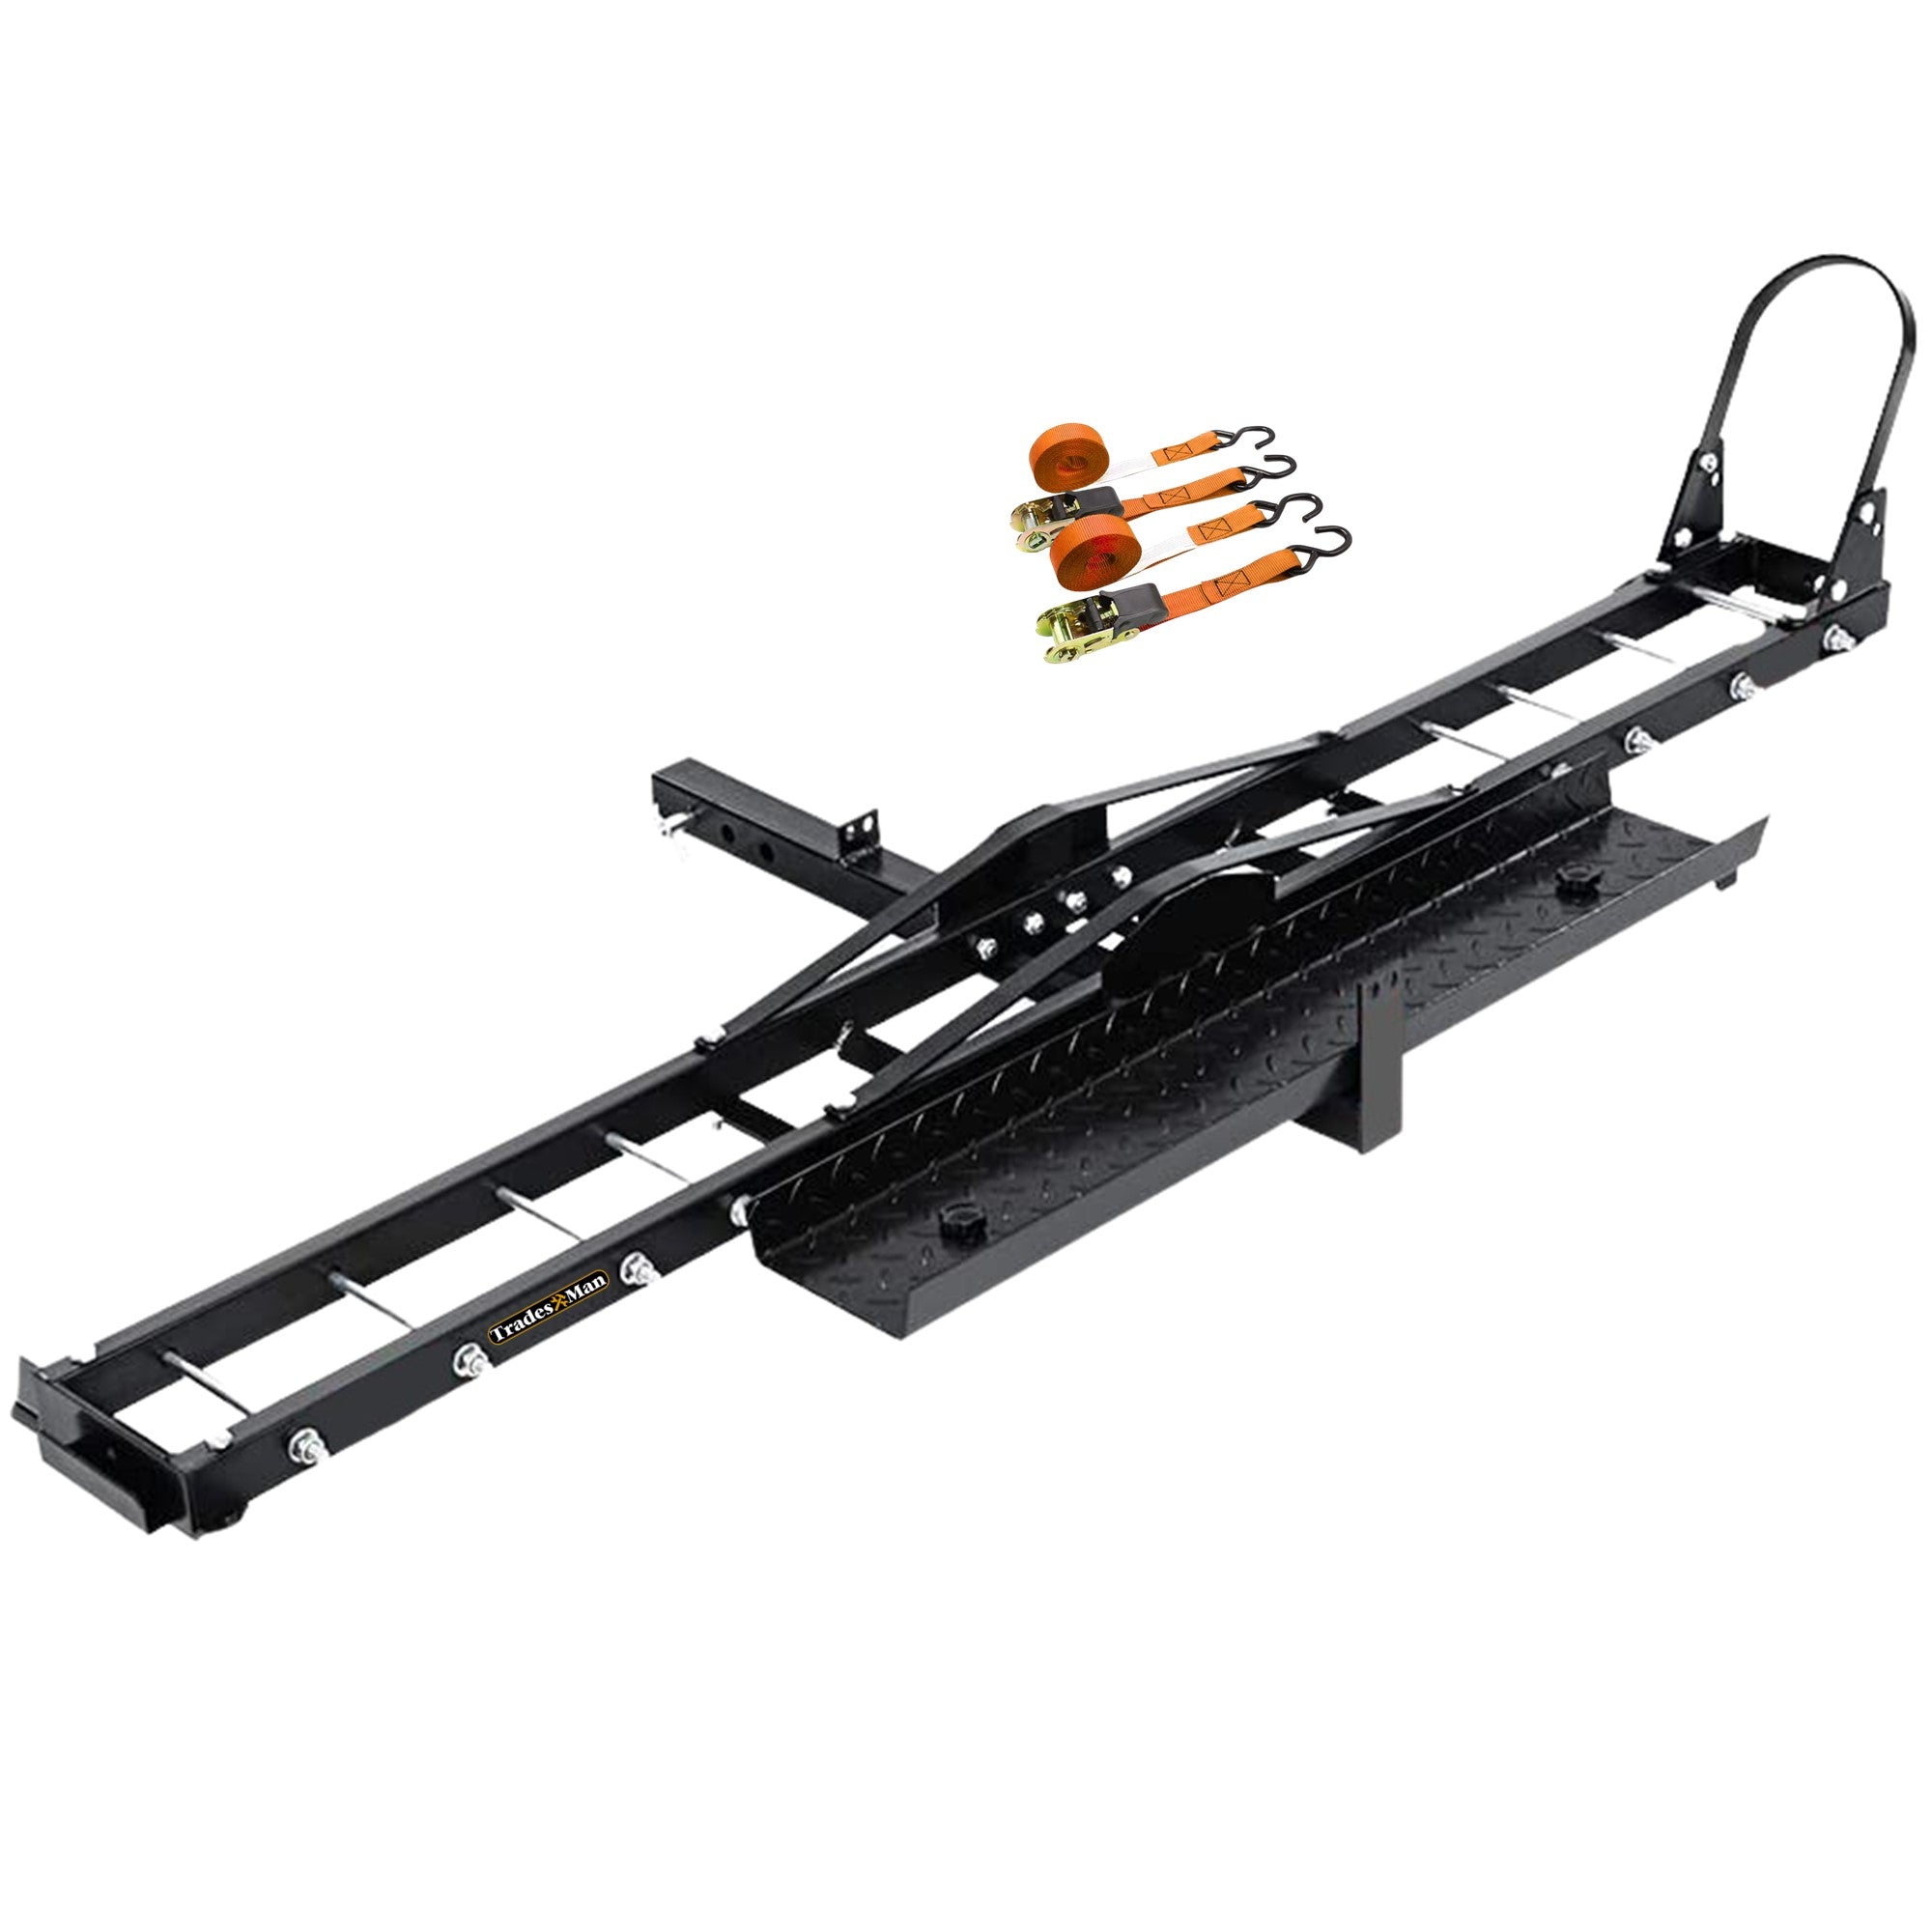 Motorcycle Carrier Rack with Straps - Mid Towing